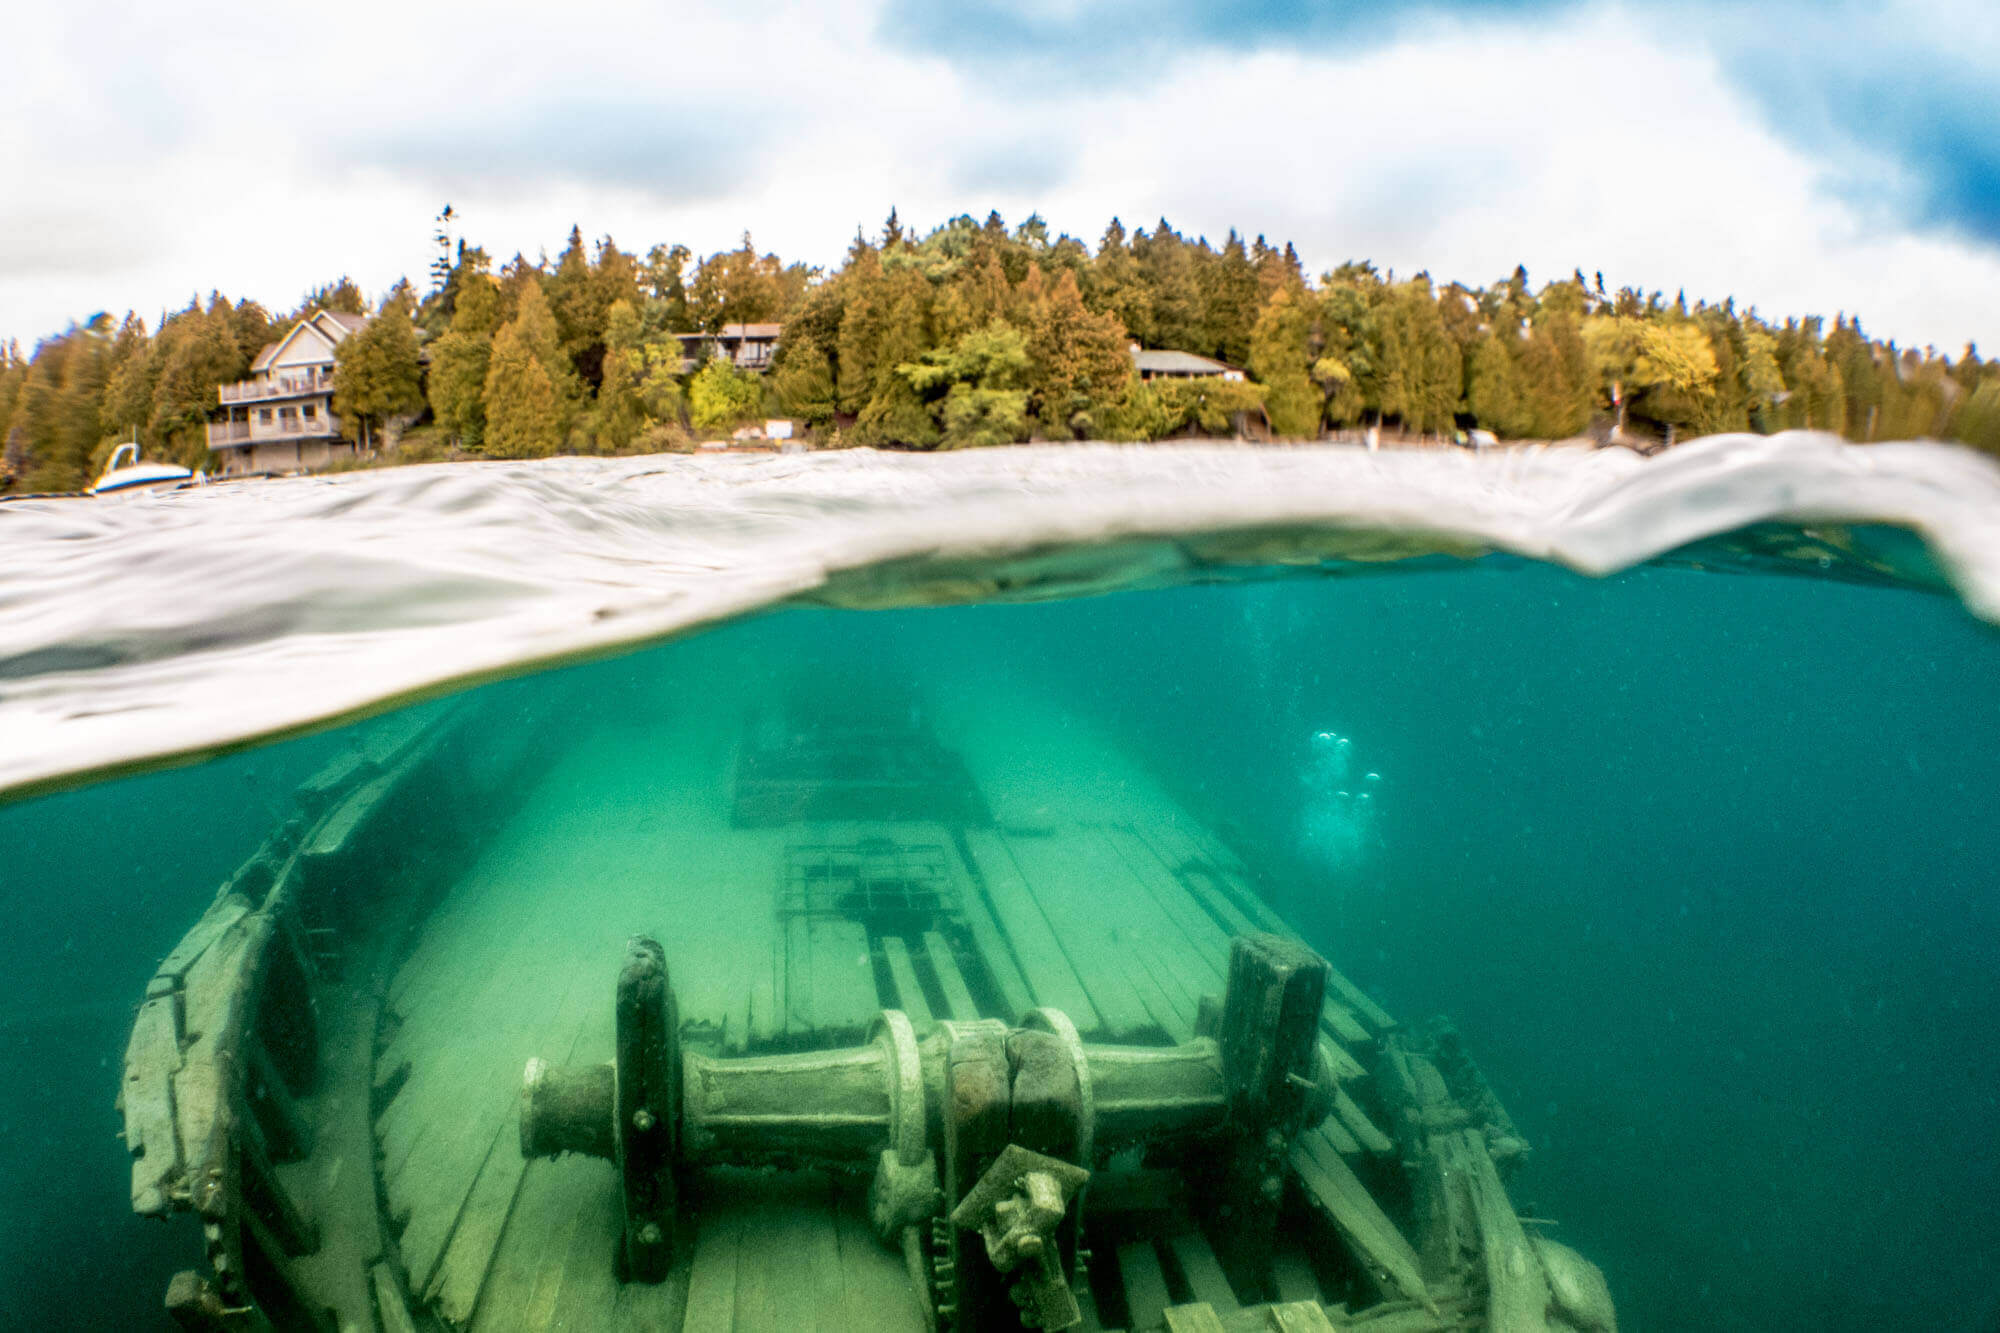 Over-under photo of the Sweepstakes shipwreck in Tobermory's Big Tub Harbour